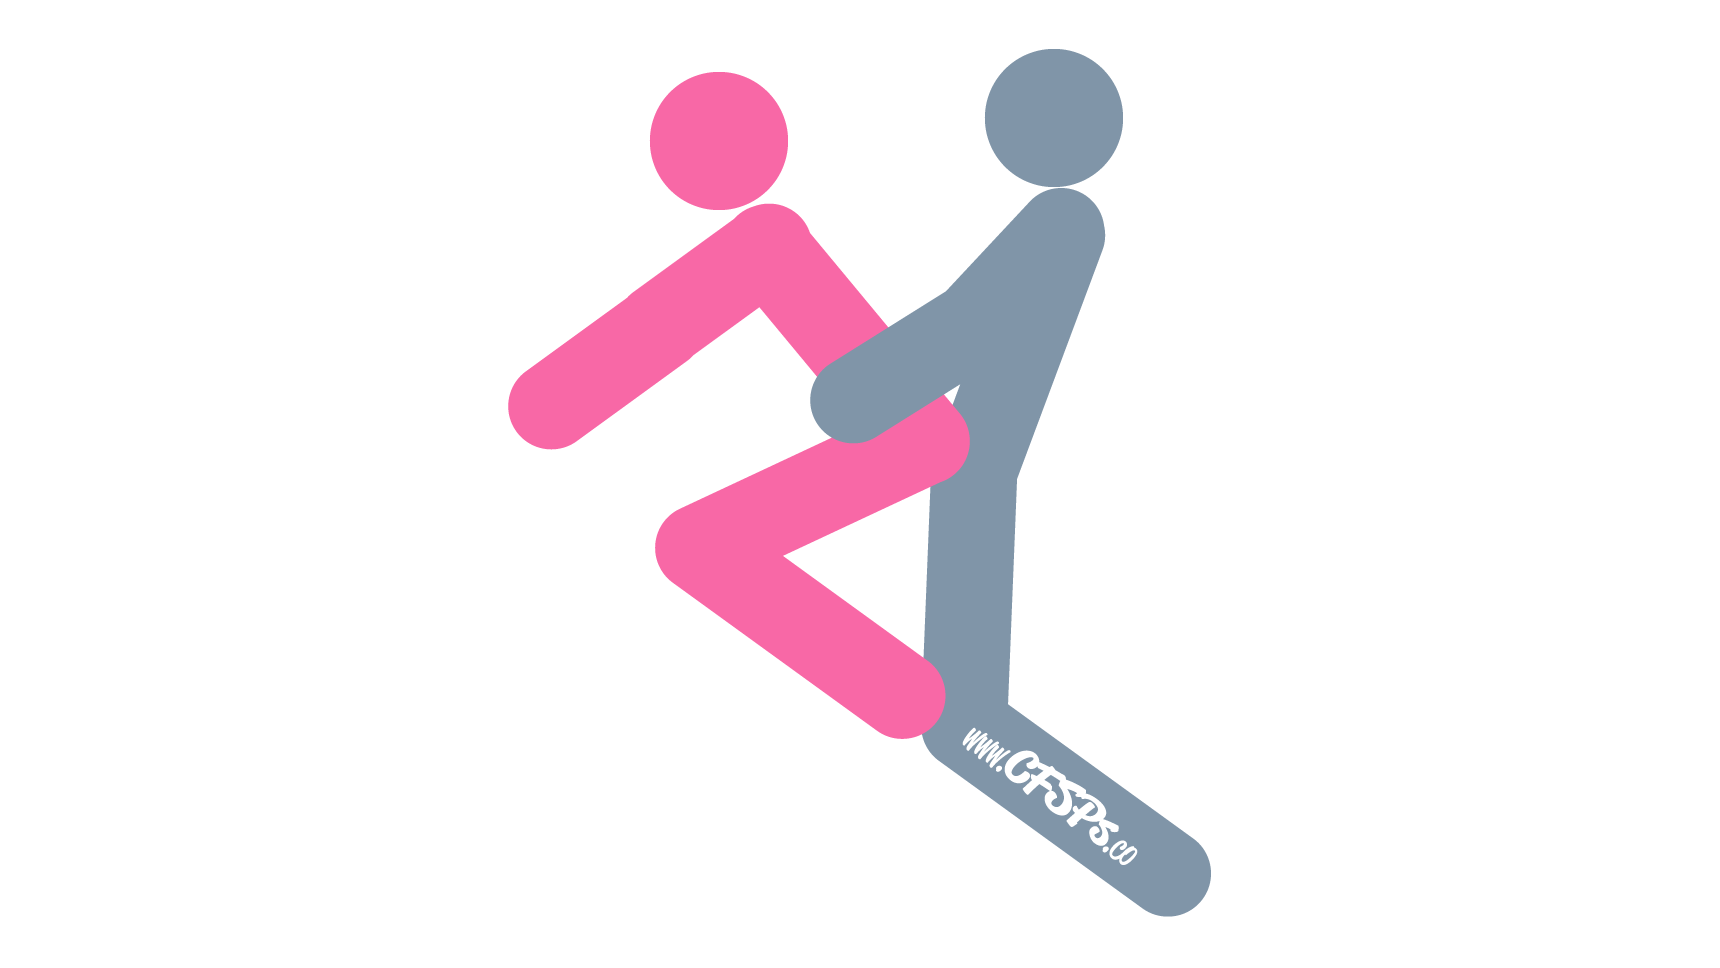 This stick figure image depicts a man and woman having sex in the Stair Master sex position. The woman is on all fours on a set of stairs, her knees on one step and her hands on a few steps above. The man is kneeling behind her a few steps down and holding on to her hips.